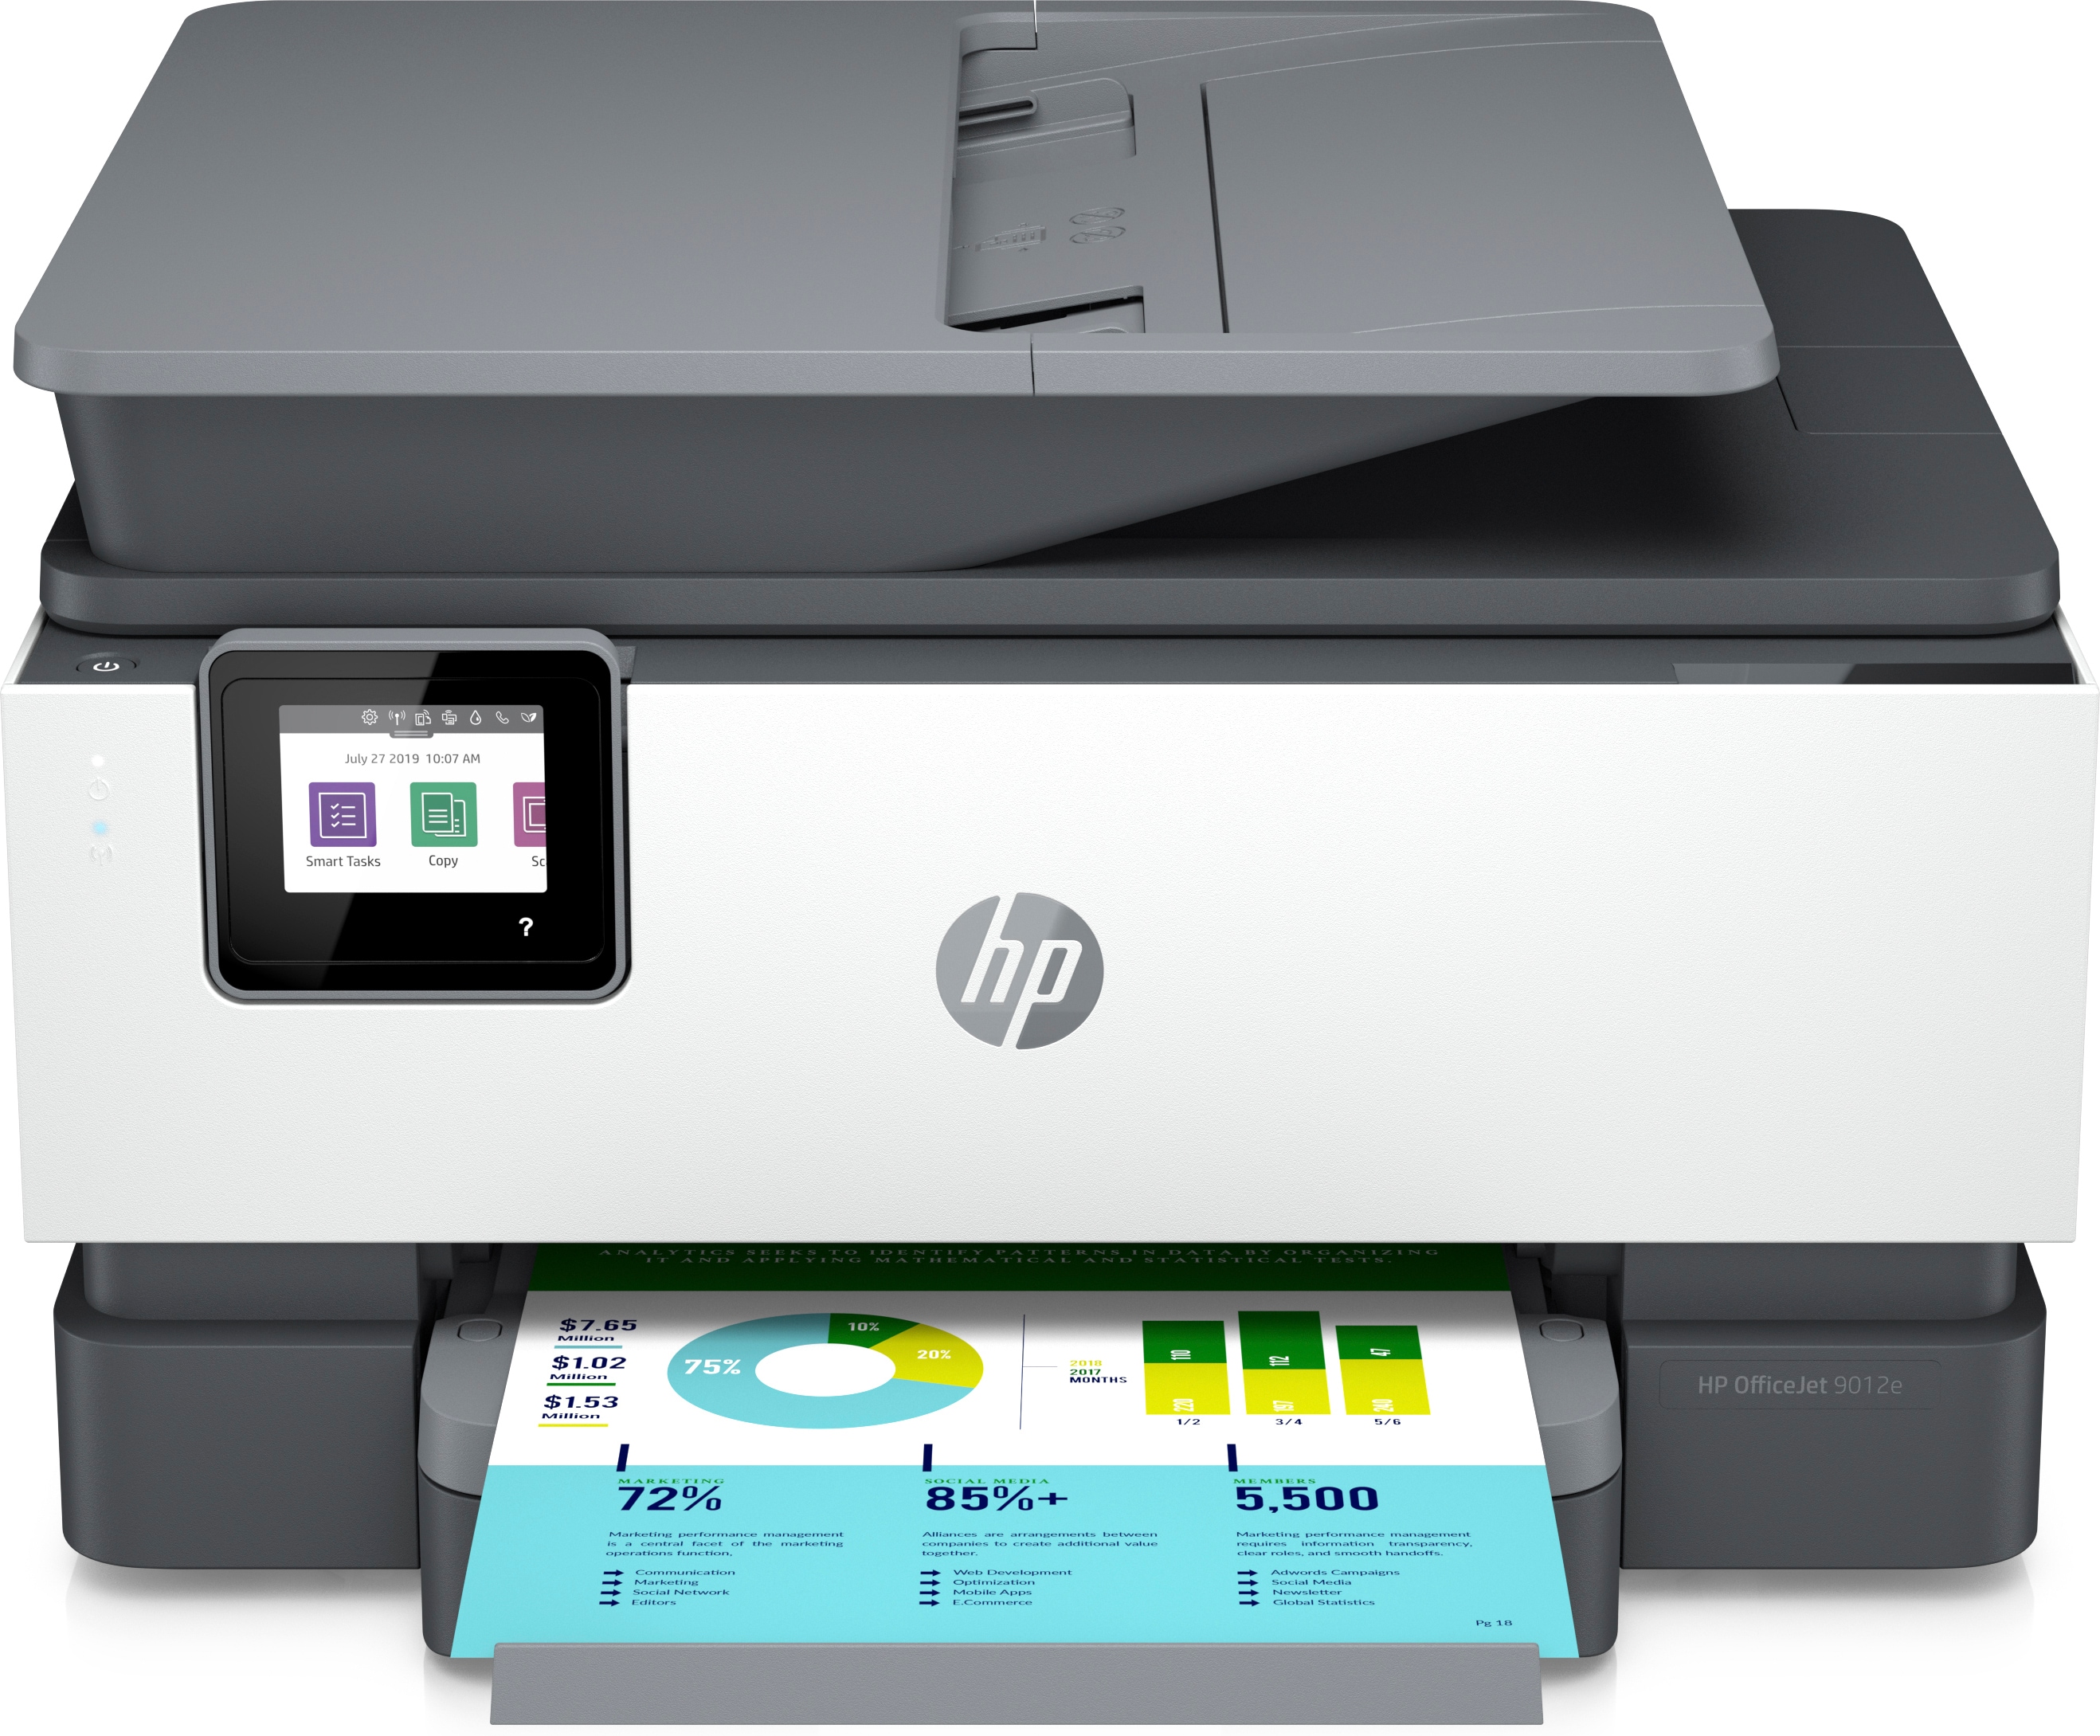 Restored HP OfficeJet 9012e All-in-One Wireless Color Inkjet Printer - 6 Months Free Instant Ink with HP+ (Refurbished) - image 1 of 7